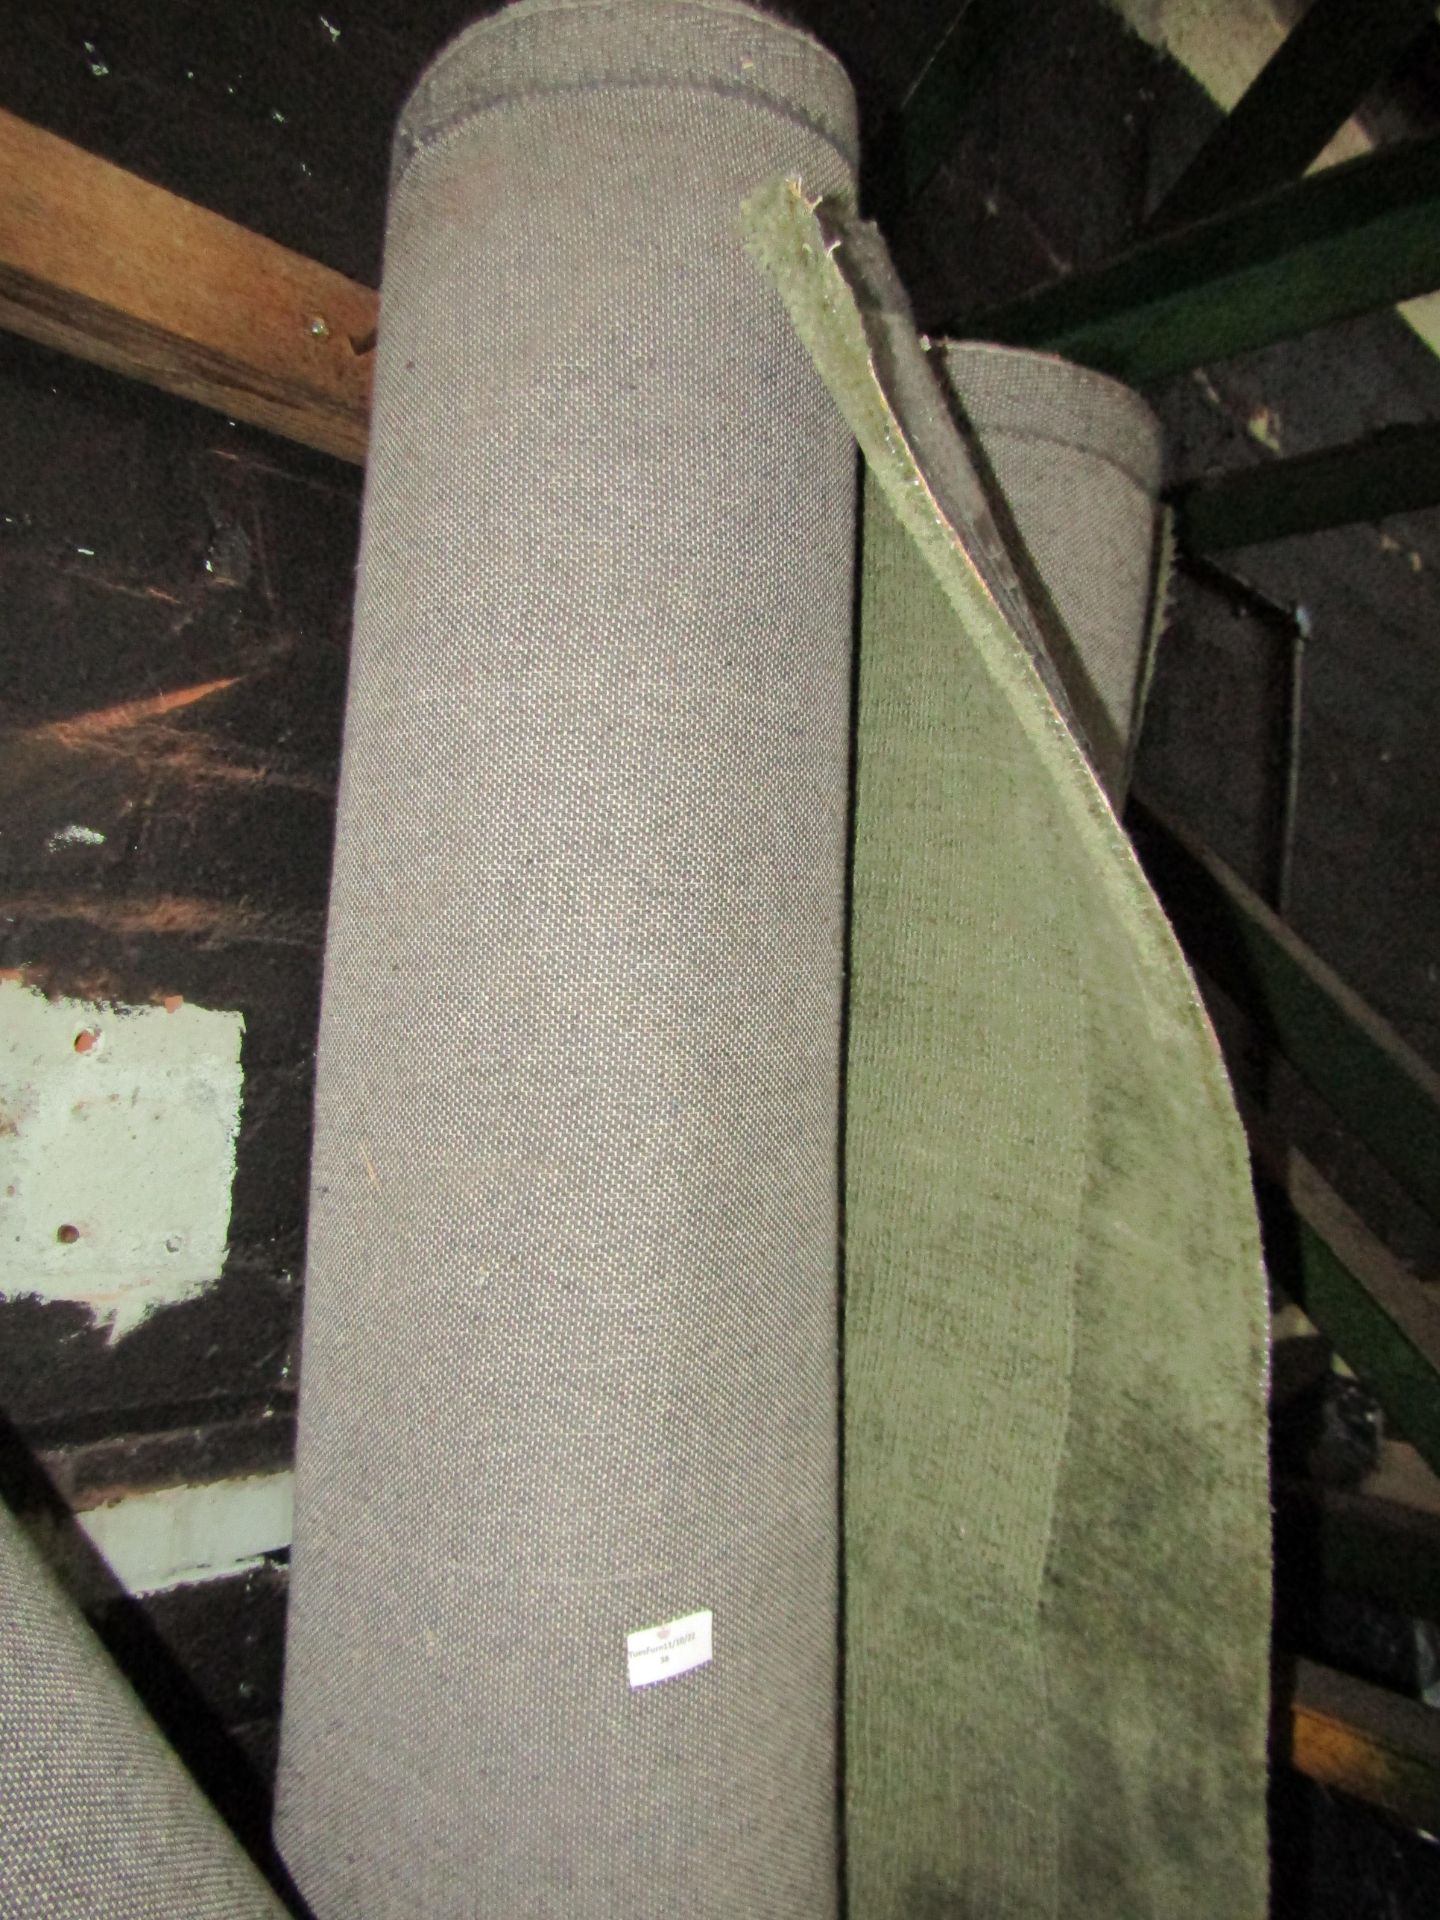 Made.com Jago Border Rug X Large 200 x 300cm Moss Green RRP Â£299 - The items in this lot are